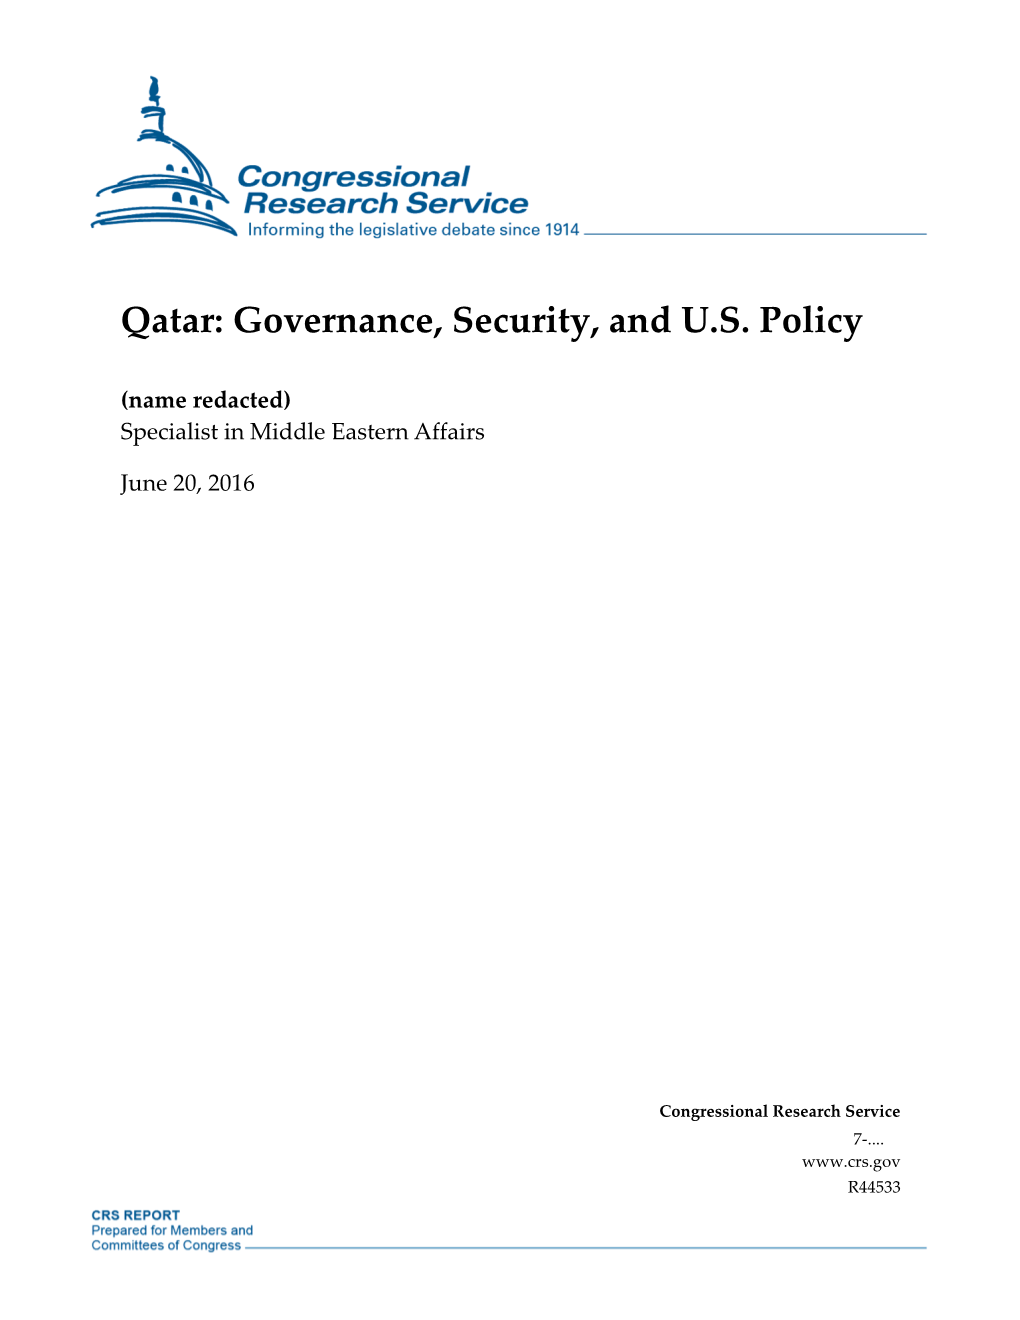 Governance, Security, and US Policy